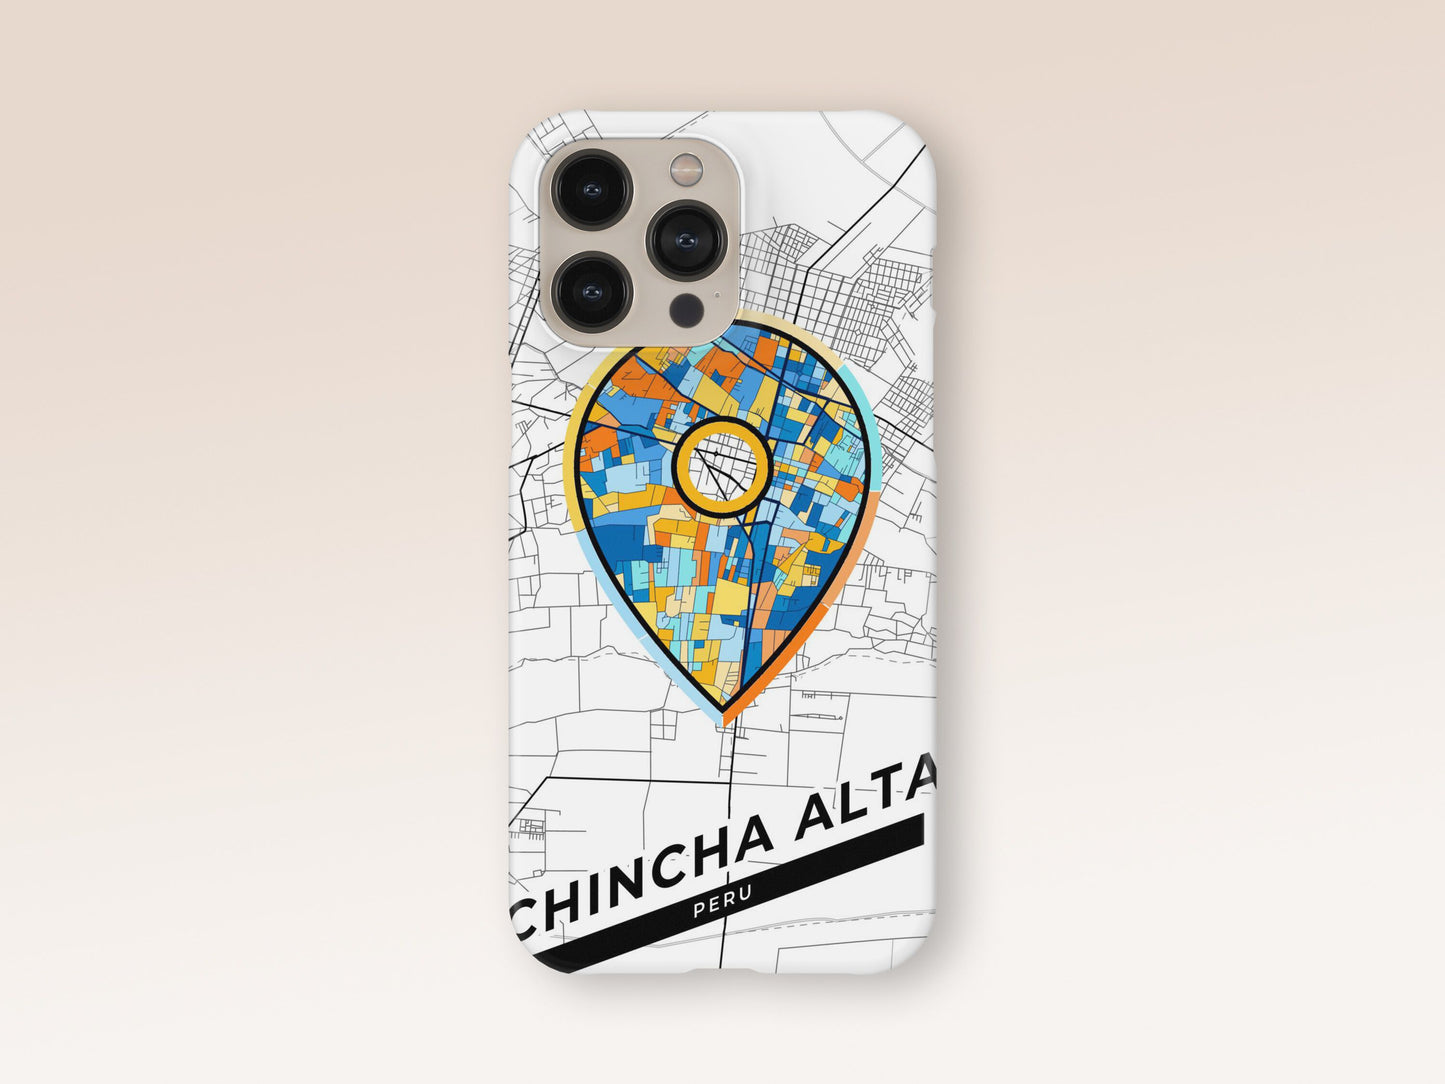 Chincha Alta Peru slim phone case with colorful icon. Birthday, wedding or housewarming gift. Couple match cases. 1